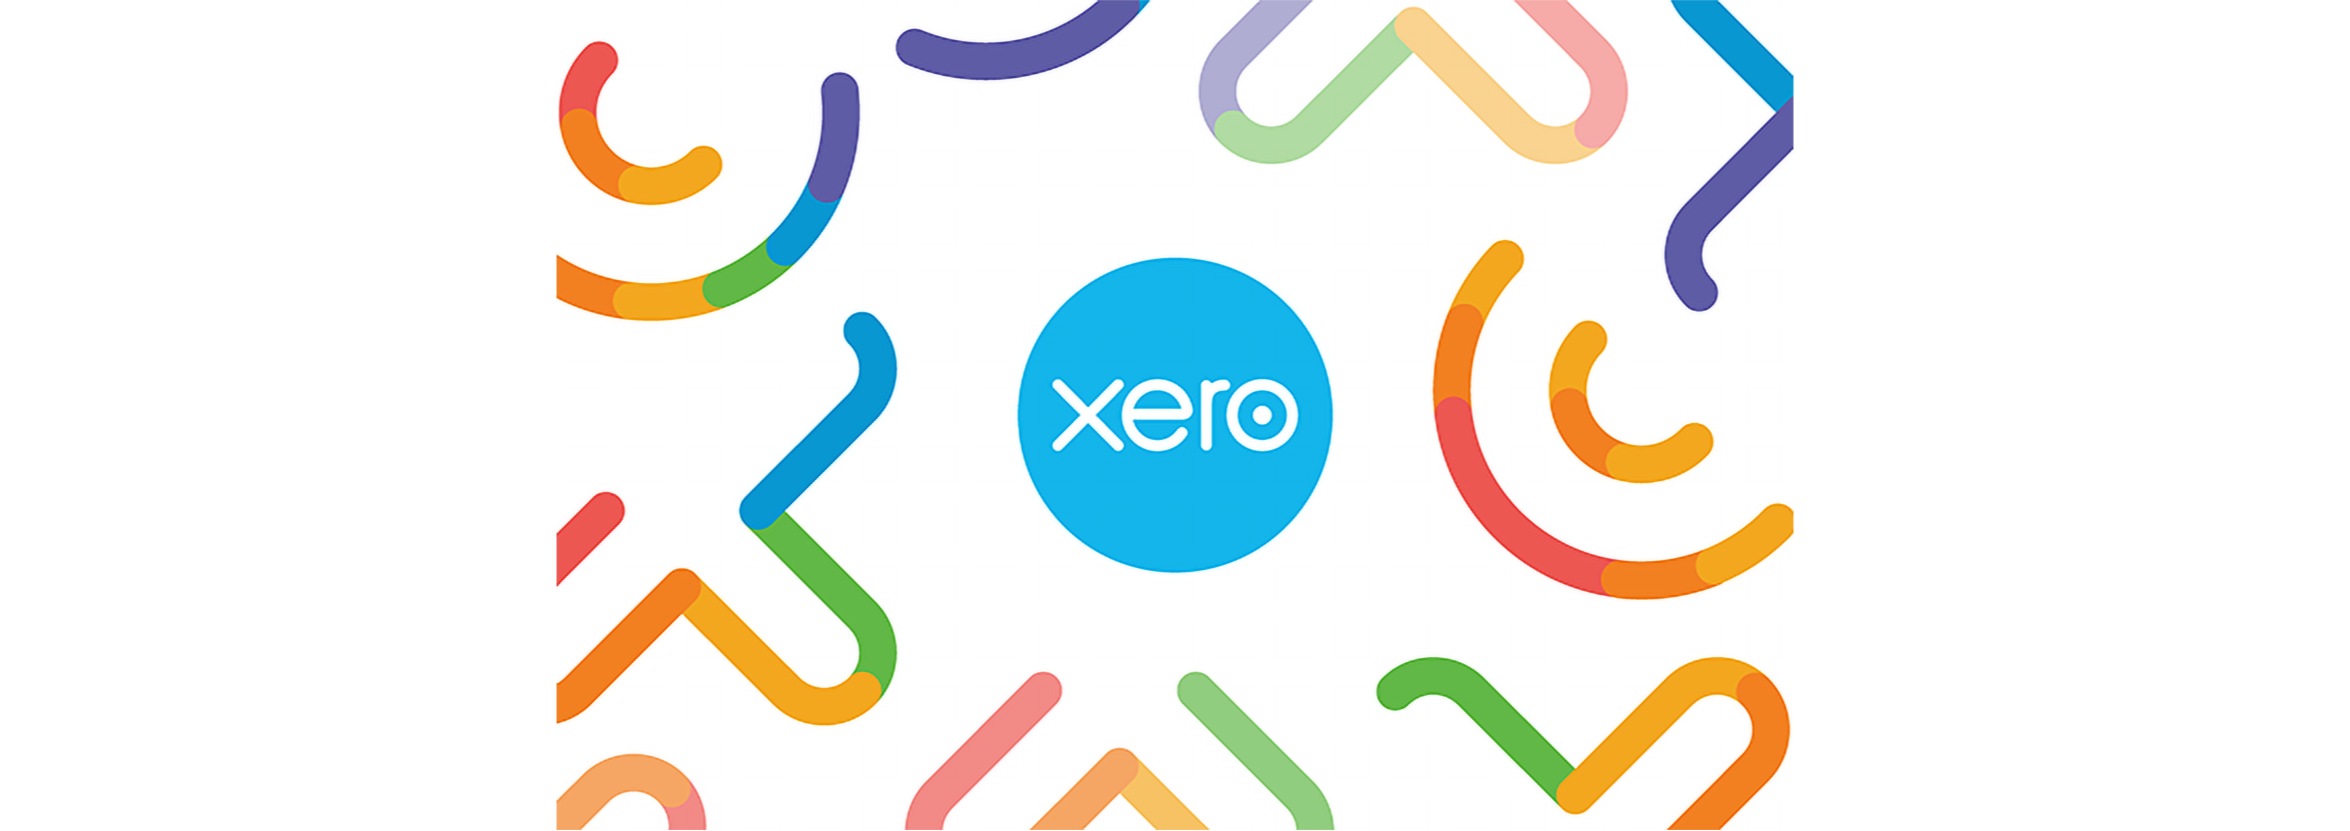 A Xero logo surrounded by colorful graphics.